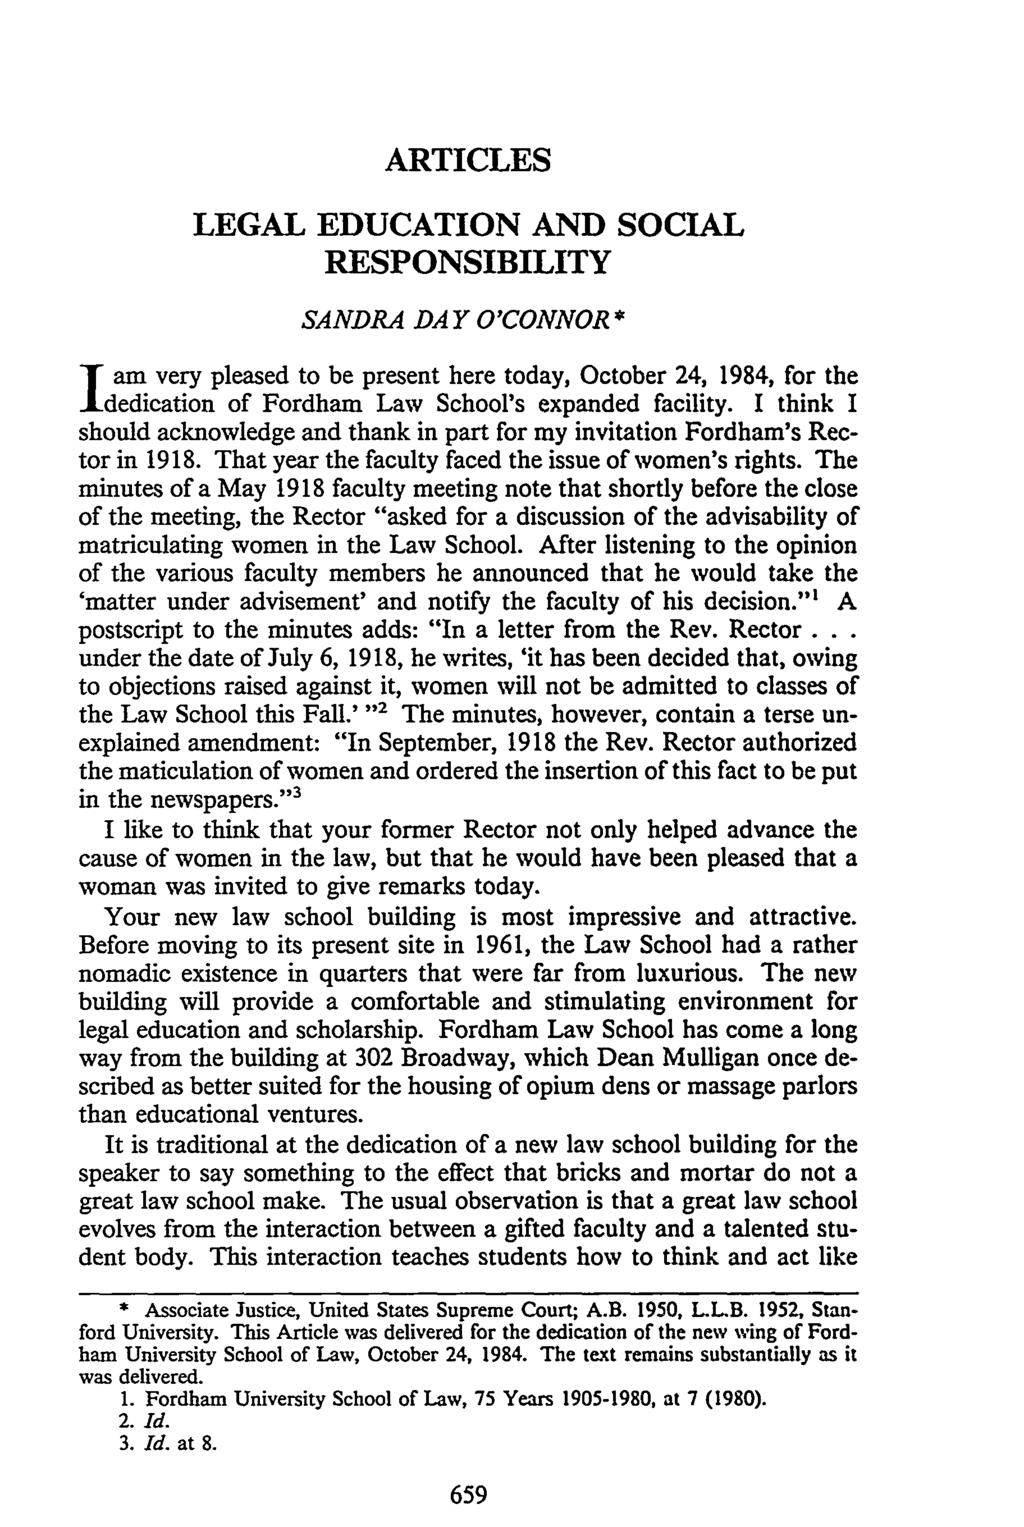 ARTICLES LEGAL EDUCATION AND SOCIAL RESPONSIBILITY SANDRA DAY O'CONNOR * J am very pleased to be present here today, October 24, 1984, for the dedication of Fordham Law School's expanded facility.